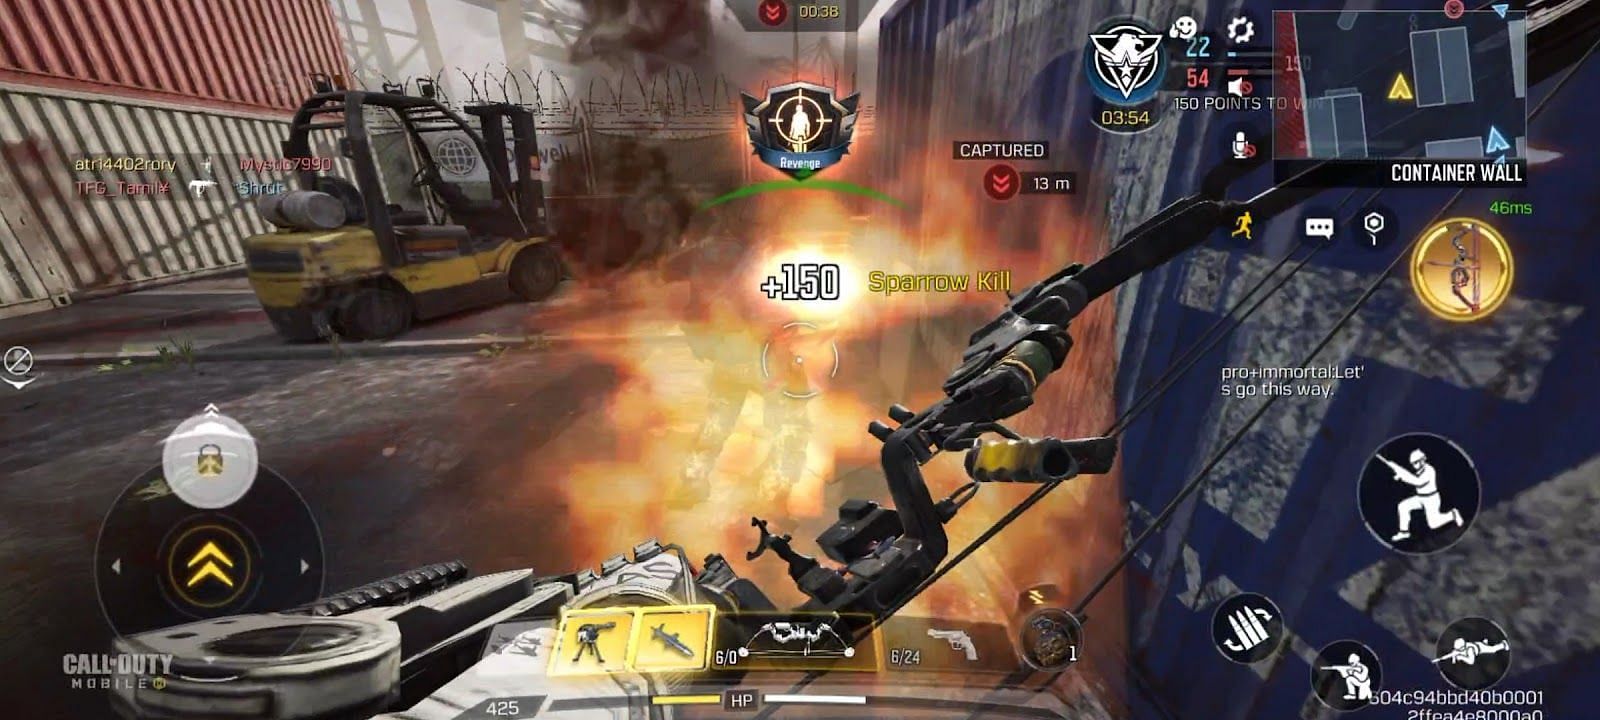 Call of Duty: Mobile (Image via Activision)